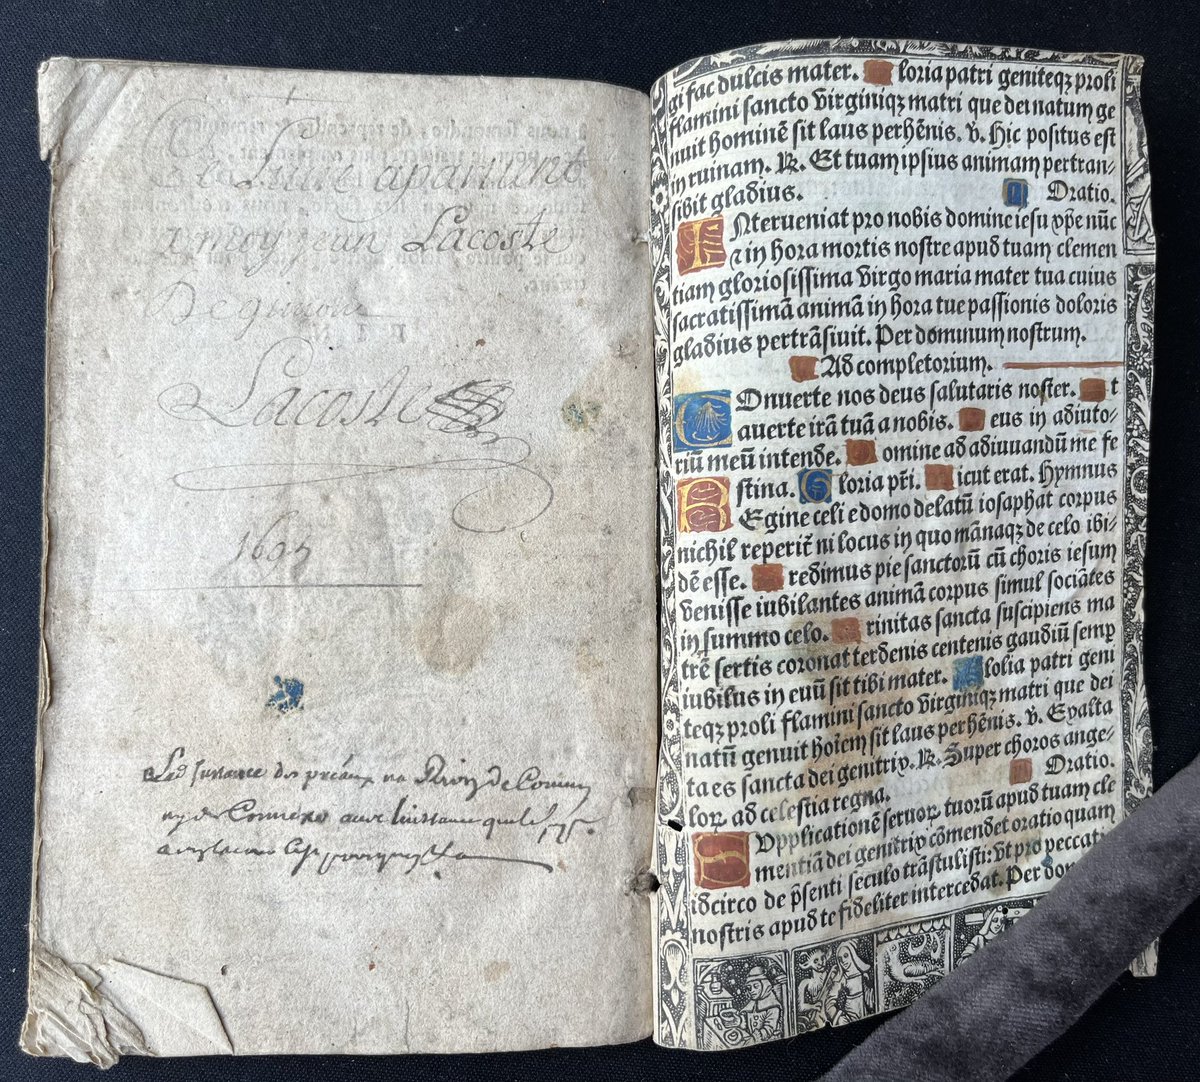 Unusual binders waste! Two pages of a vellum Parisian Book of Hours (~1525 Hardouyn(?)) were used for this French booklet (1618) about inheritance law. 

Look at the handpainted initials! 😍

#fragmentfriday 
#fragmentology
#bookhistory
#recycling